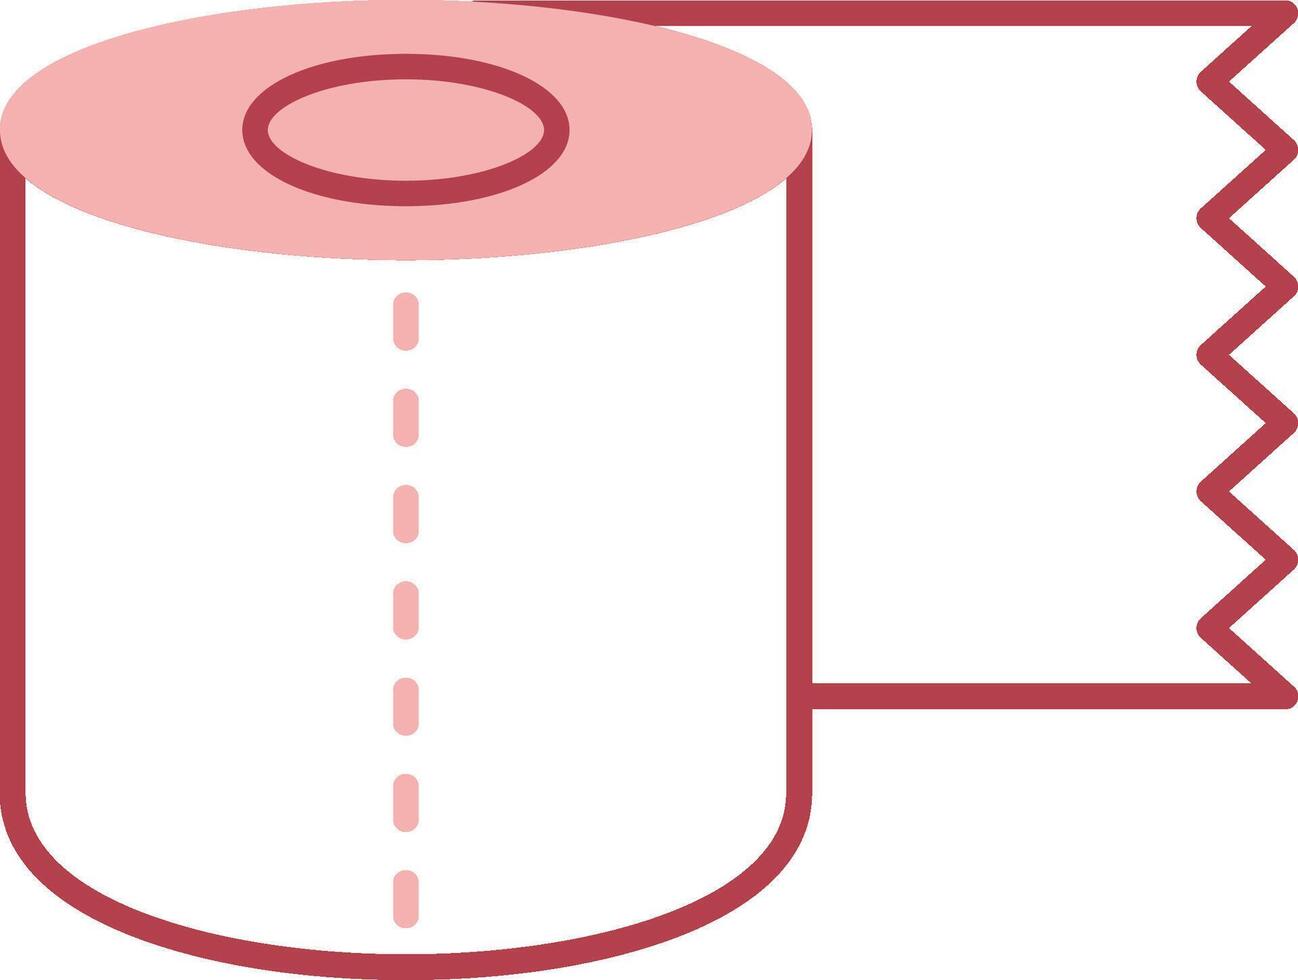 Toilet Paper Solid Two Color Icon vector